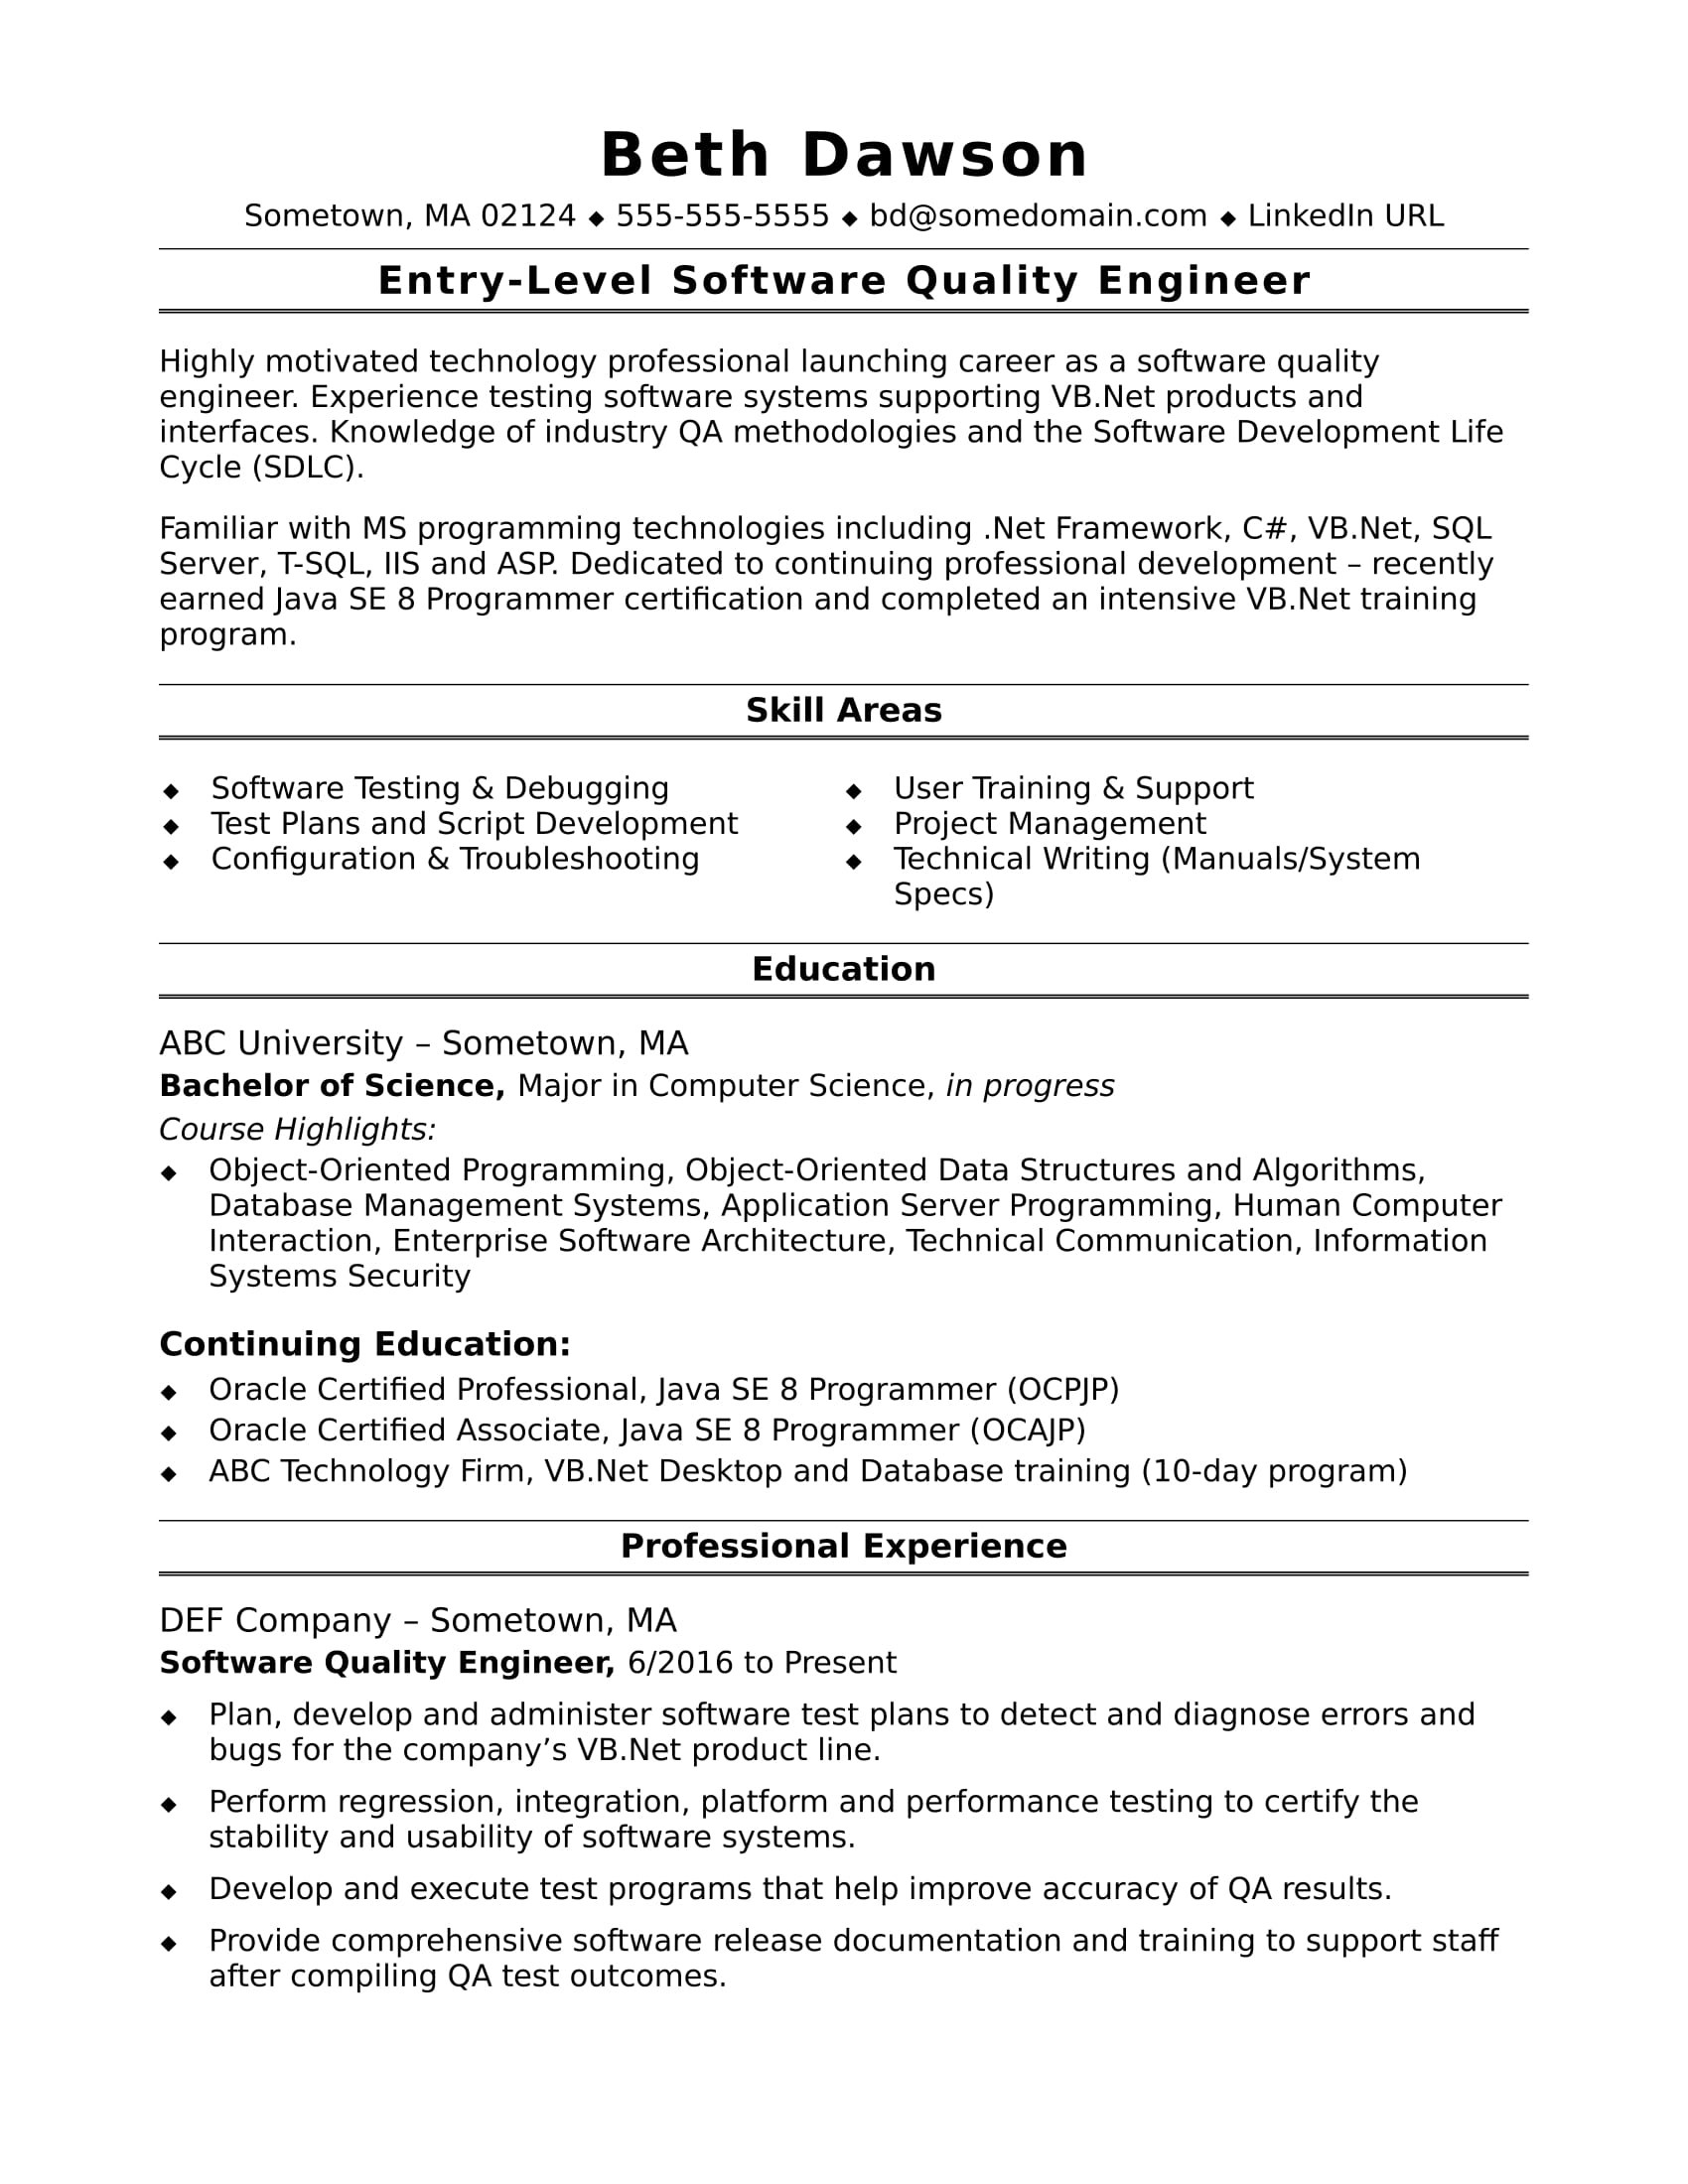 Sample Resume for an Entry Level Quality Engineer